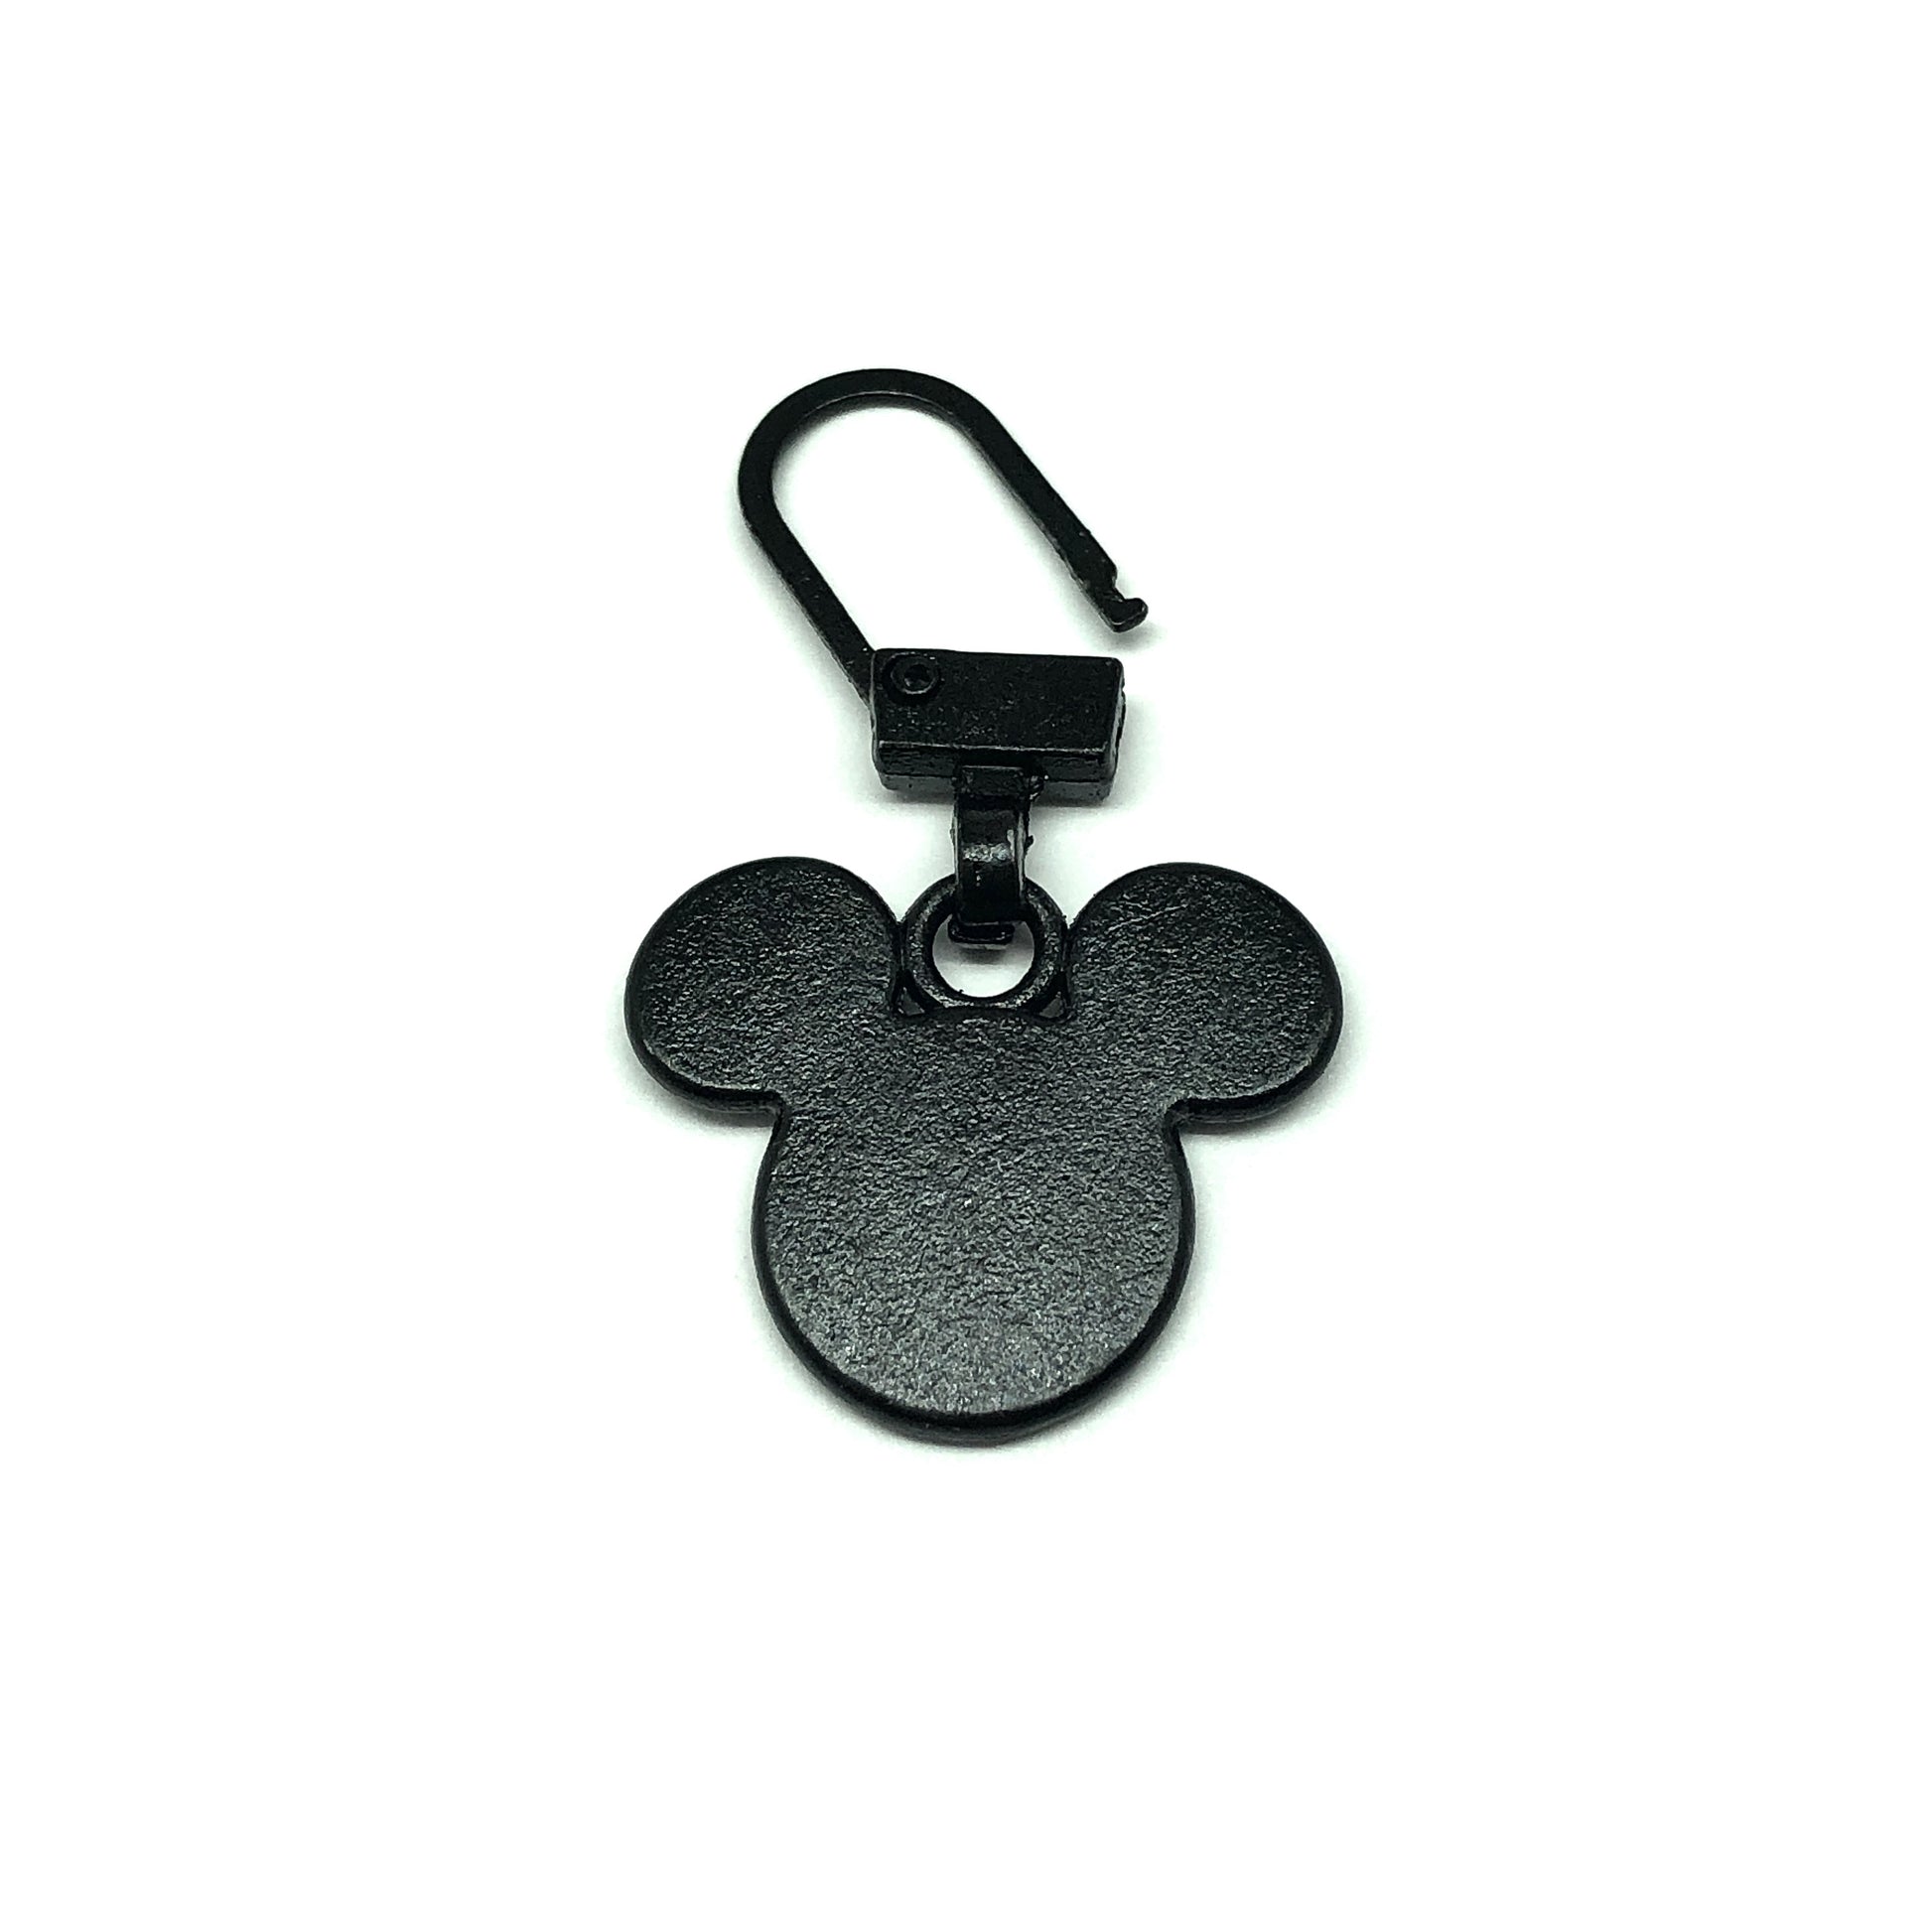 Mickey Mouse Silhouette Charm - Zipper Pull Charm for Repair or Decorative Shoe, Purse, Keychain, Backpacks & More